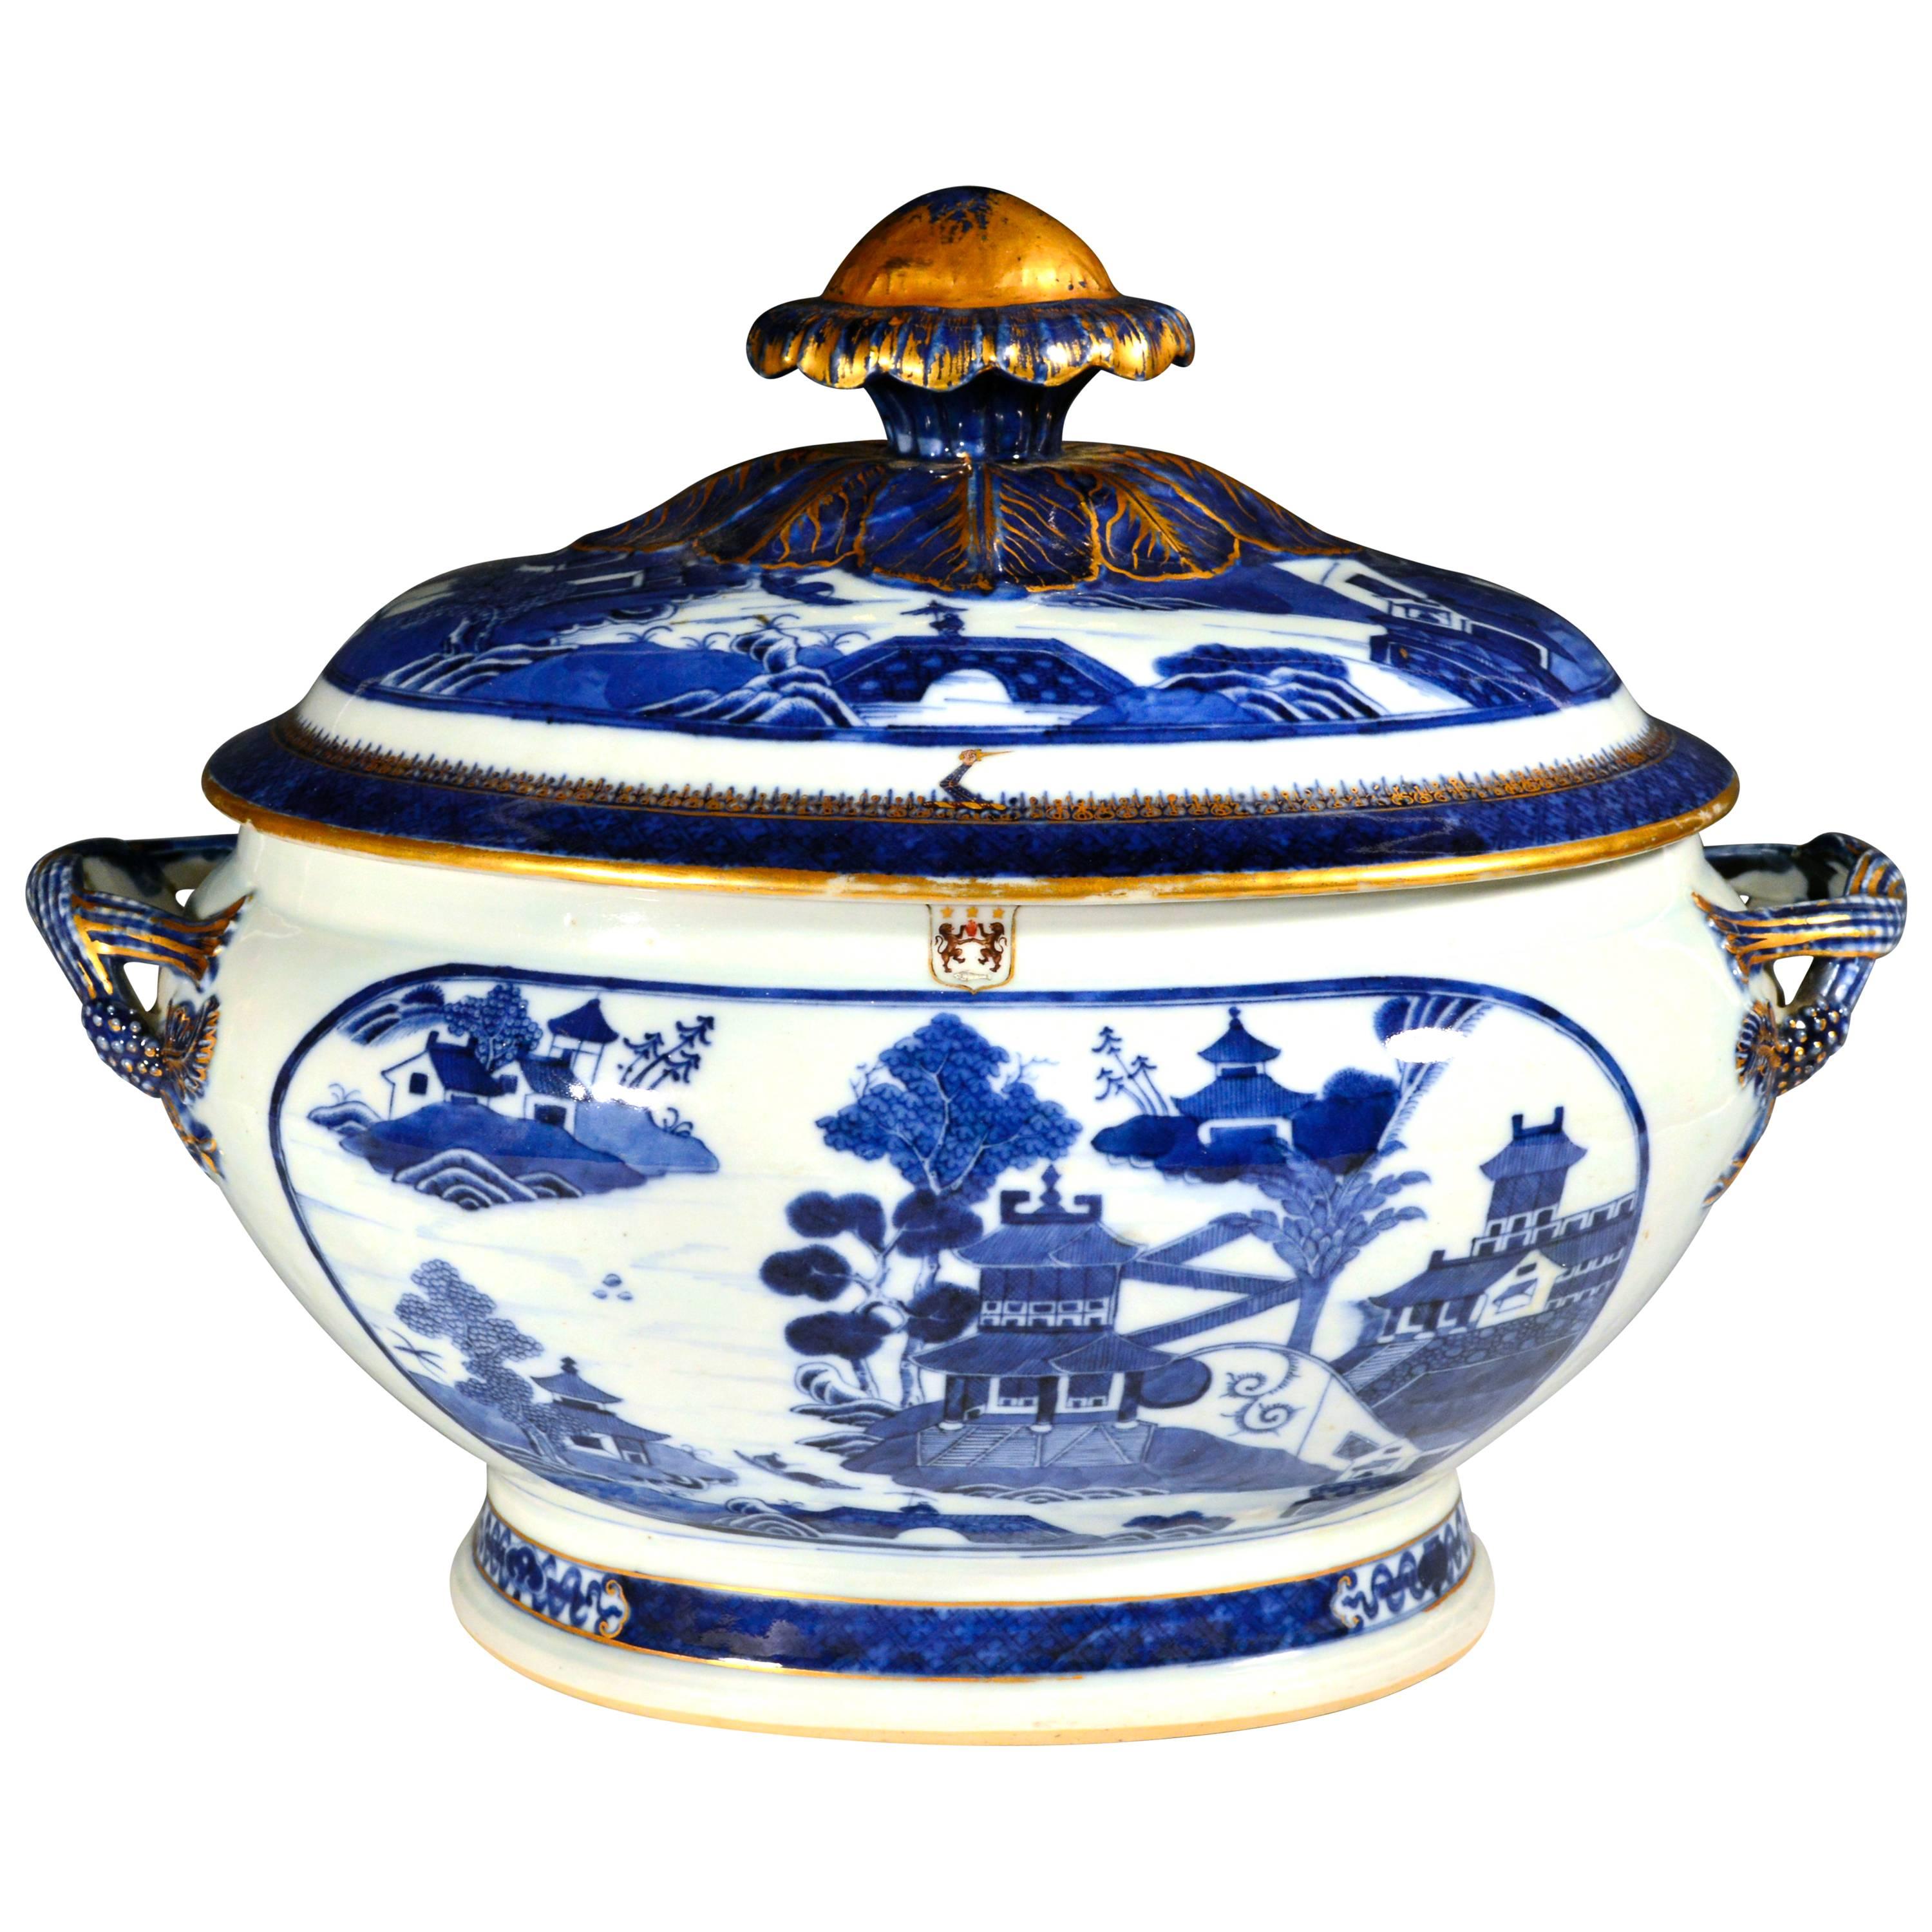 Chinese Blue and White Armorial Porcelain Tureen and Cover, O'neill Family Arms